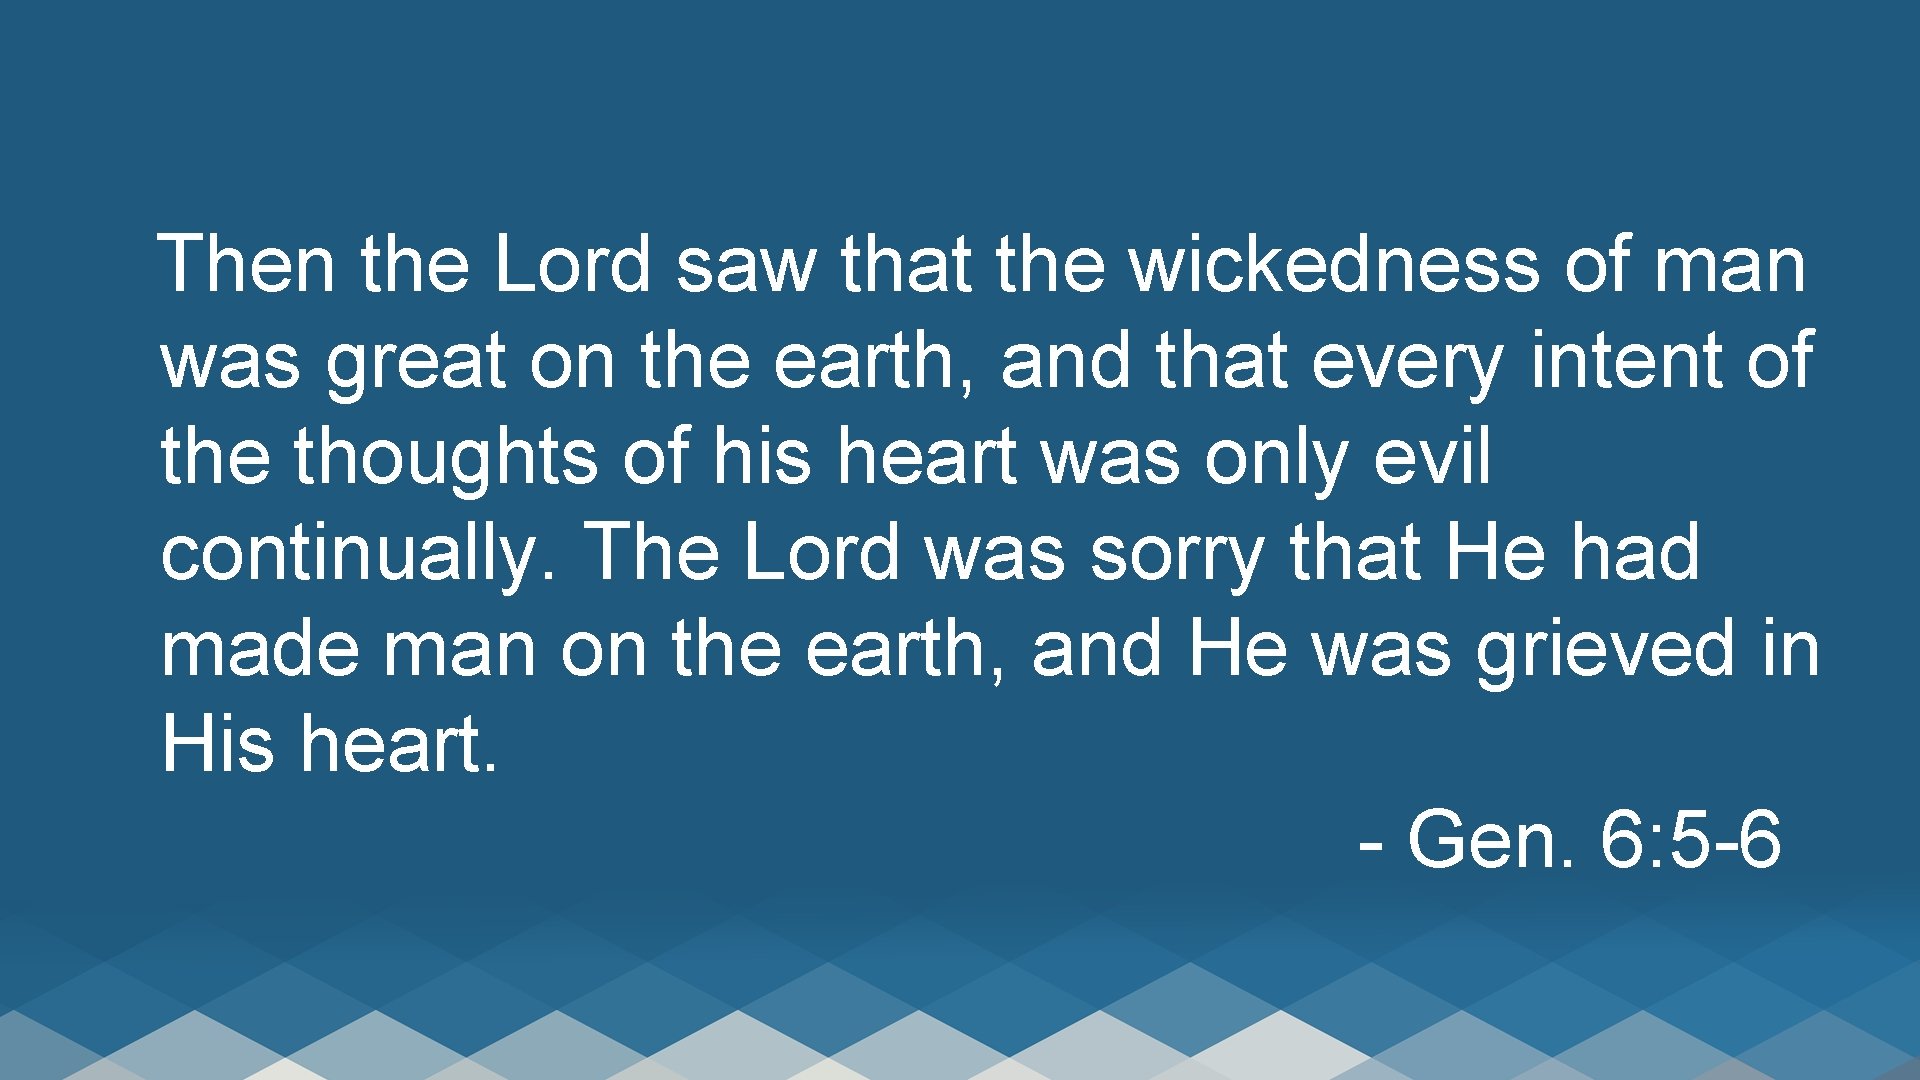 Then the Lord saw that the wickedness of man was great on the earth,